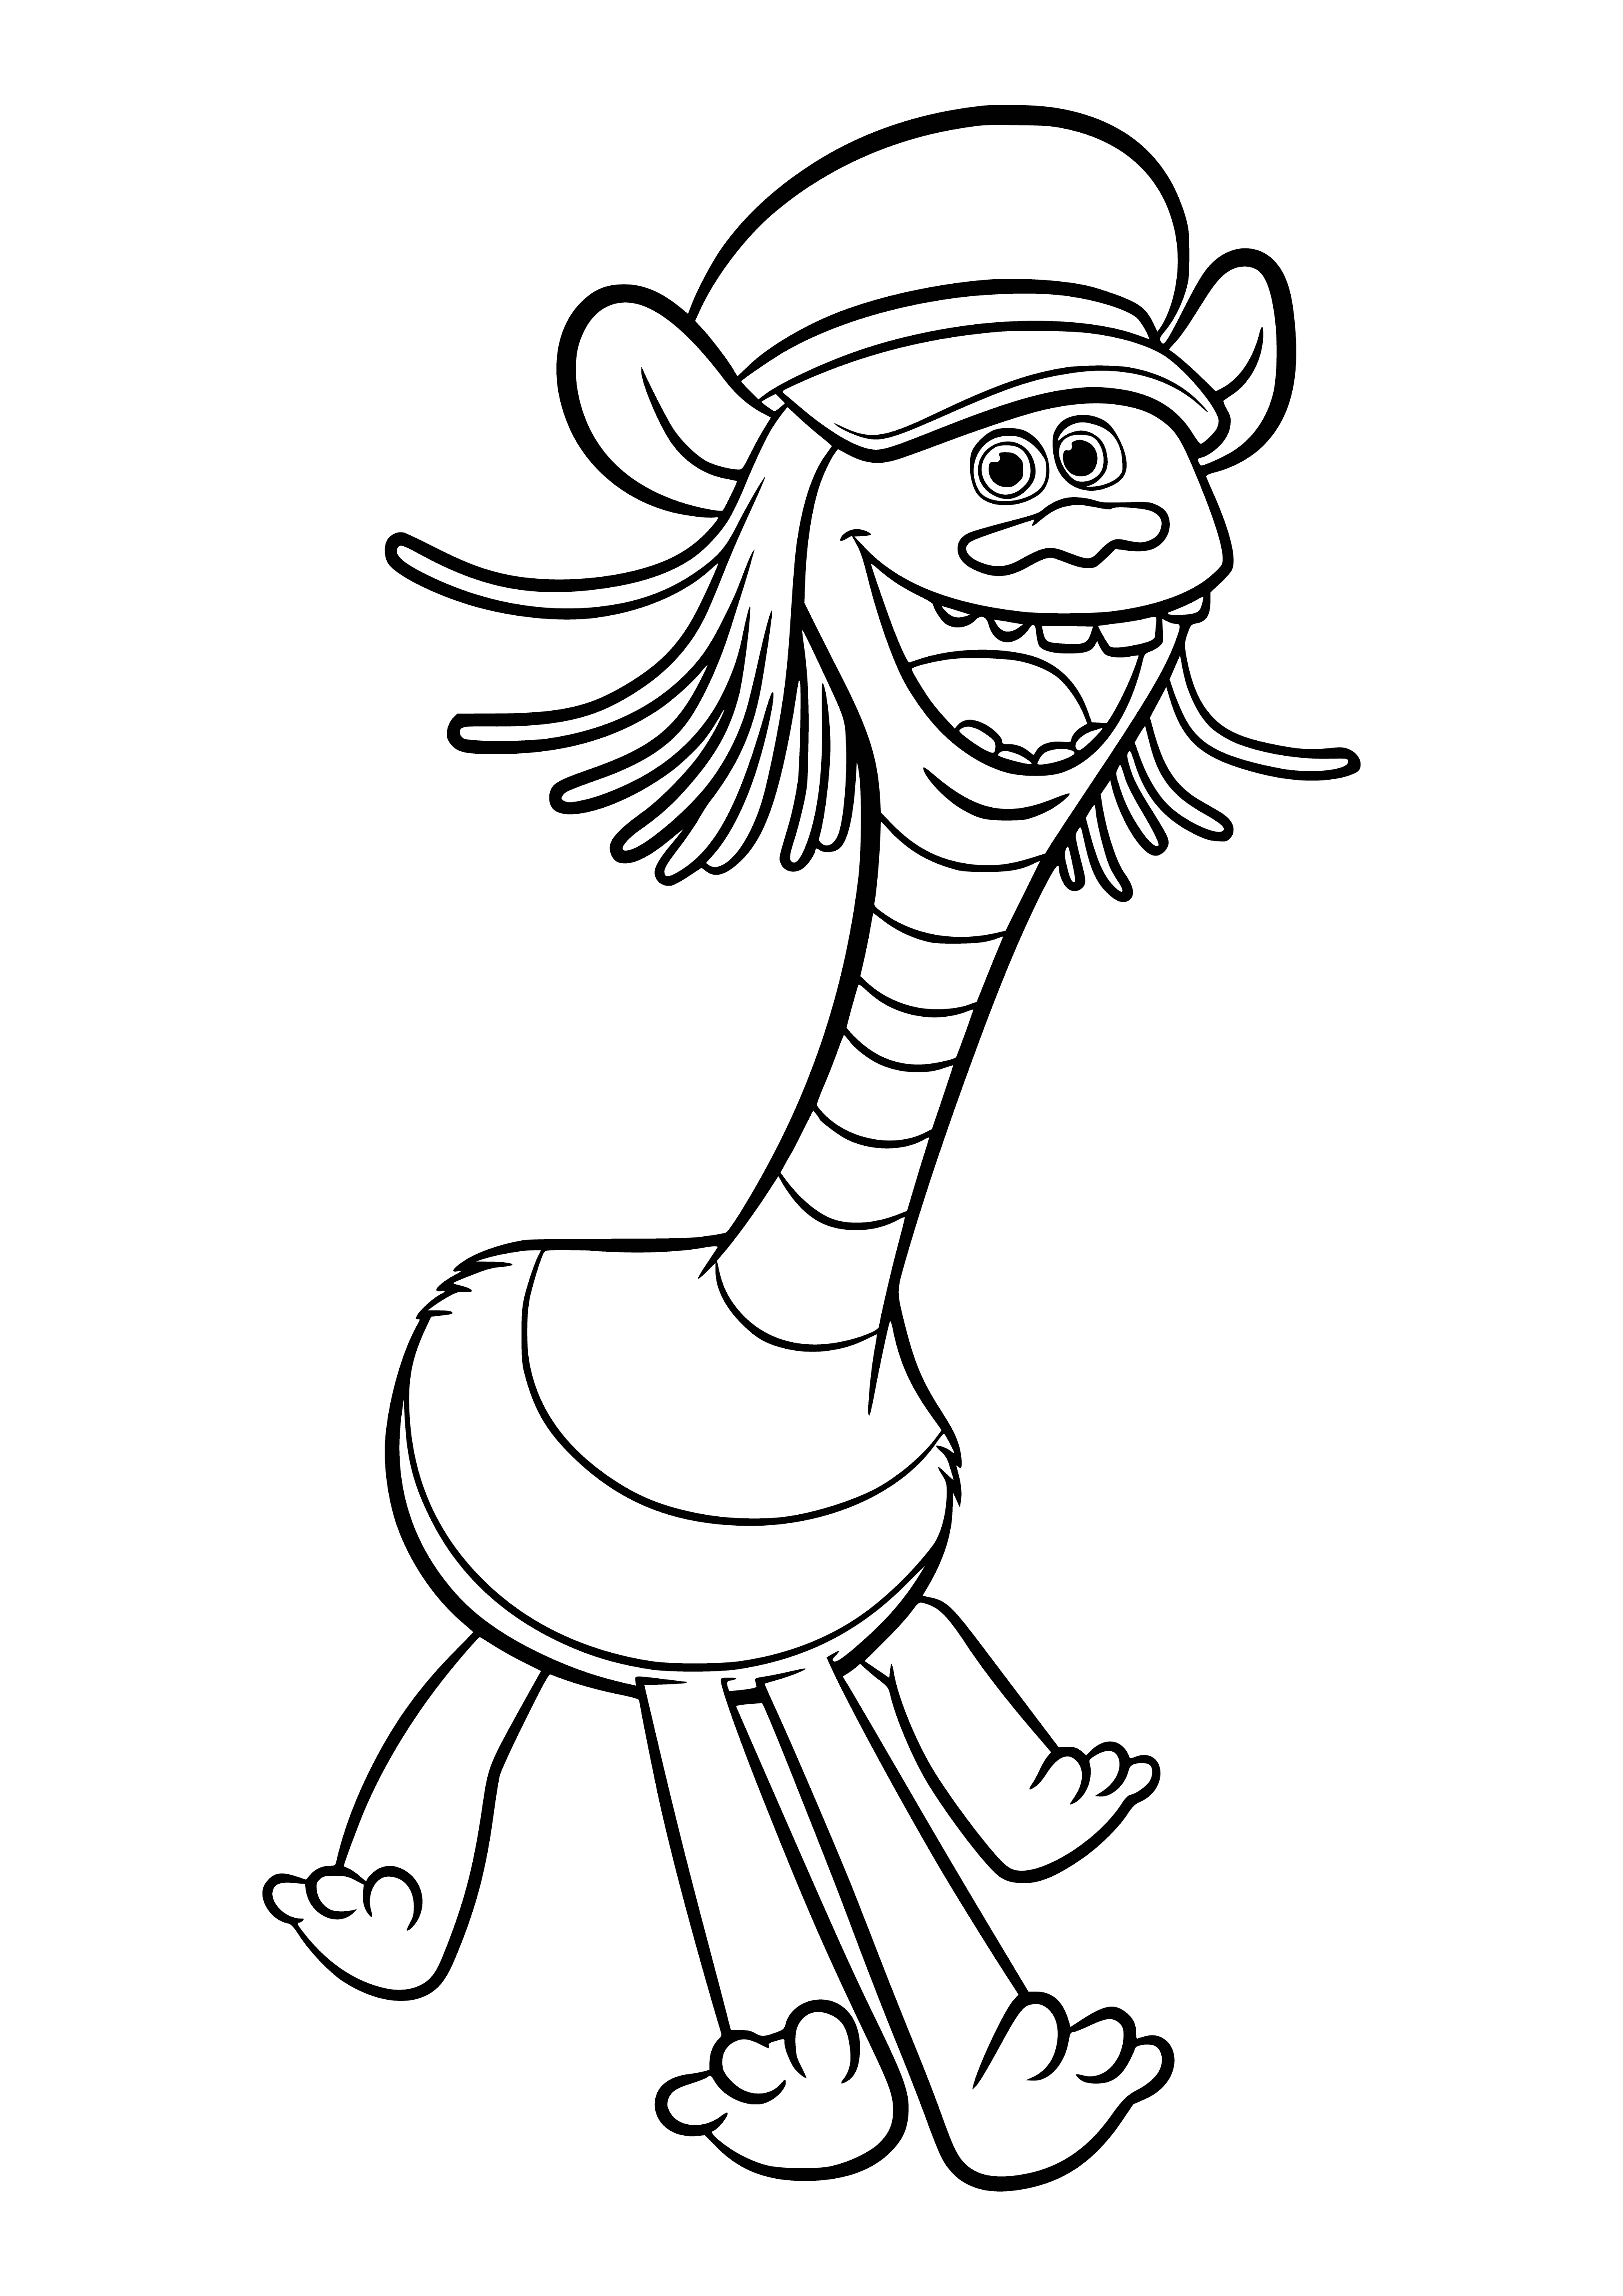 Troll Cooper coloring page